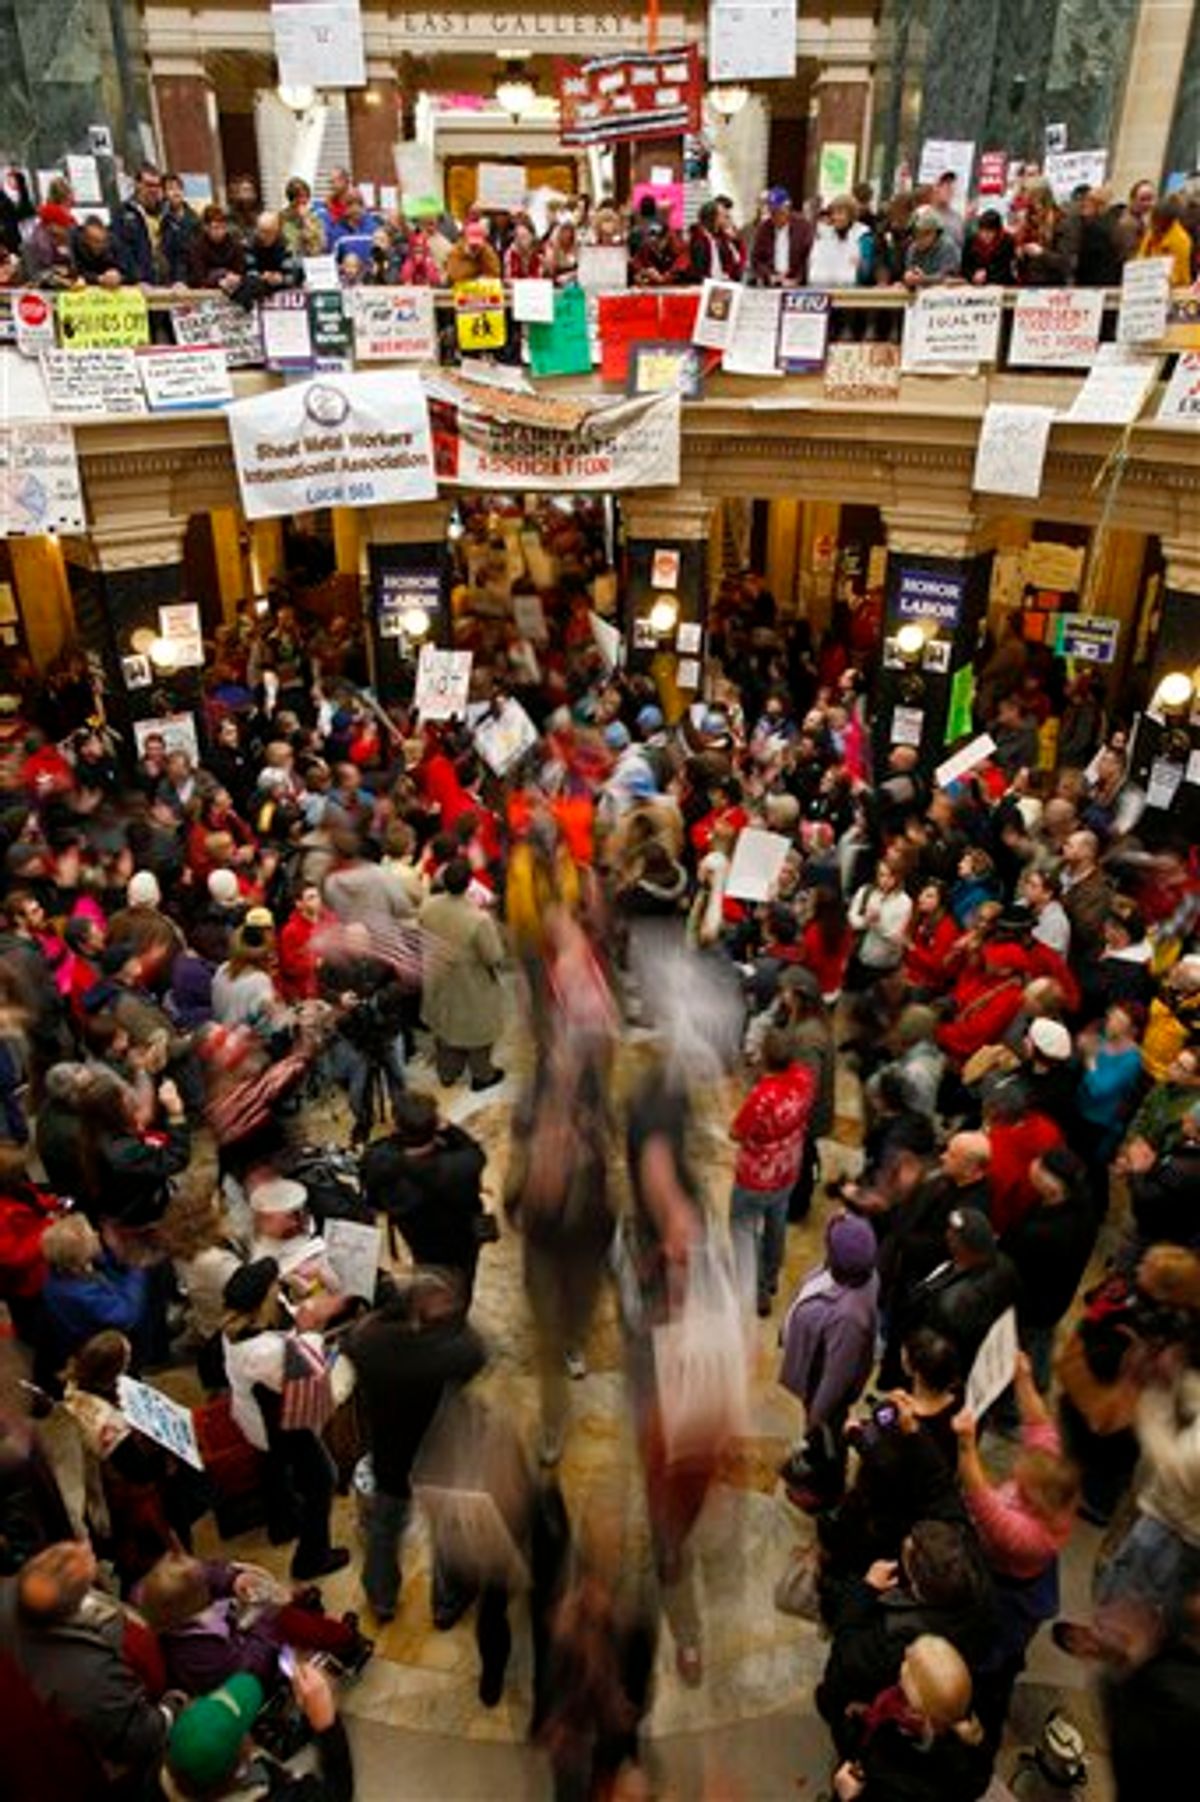 Protesters to the governor's bill to eliminate collective bargaining rights for many state workers march through the center of the rotunda at the state Capitol in Madison, Wis., Friday, Feb. 25, 2011.  Protests are in their 11th day at the Capitol. (AP Photo/Andy Manis) (AP)